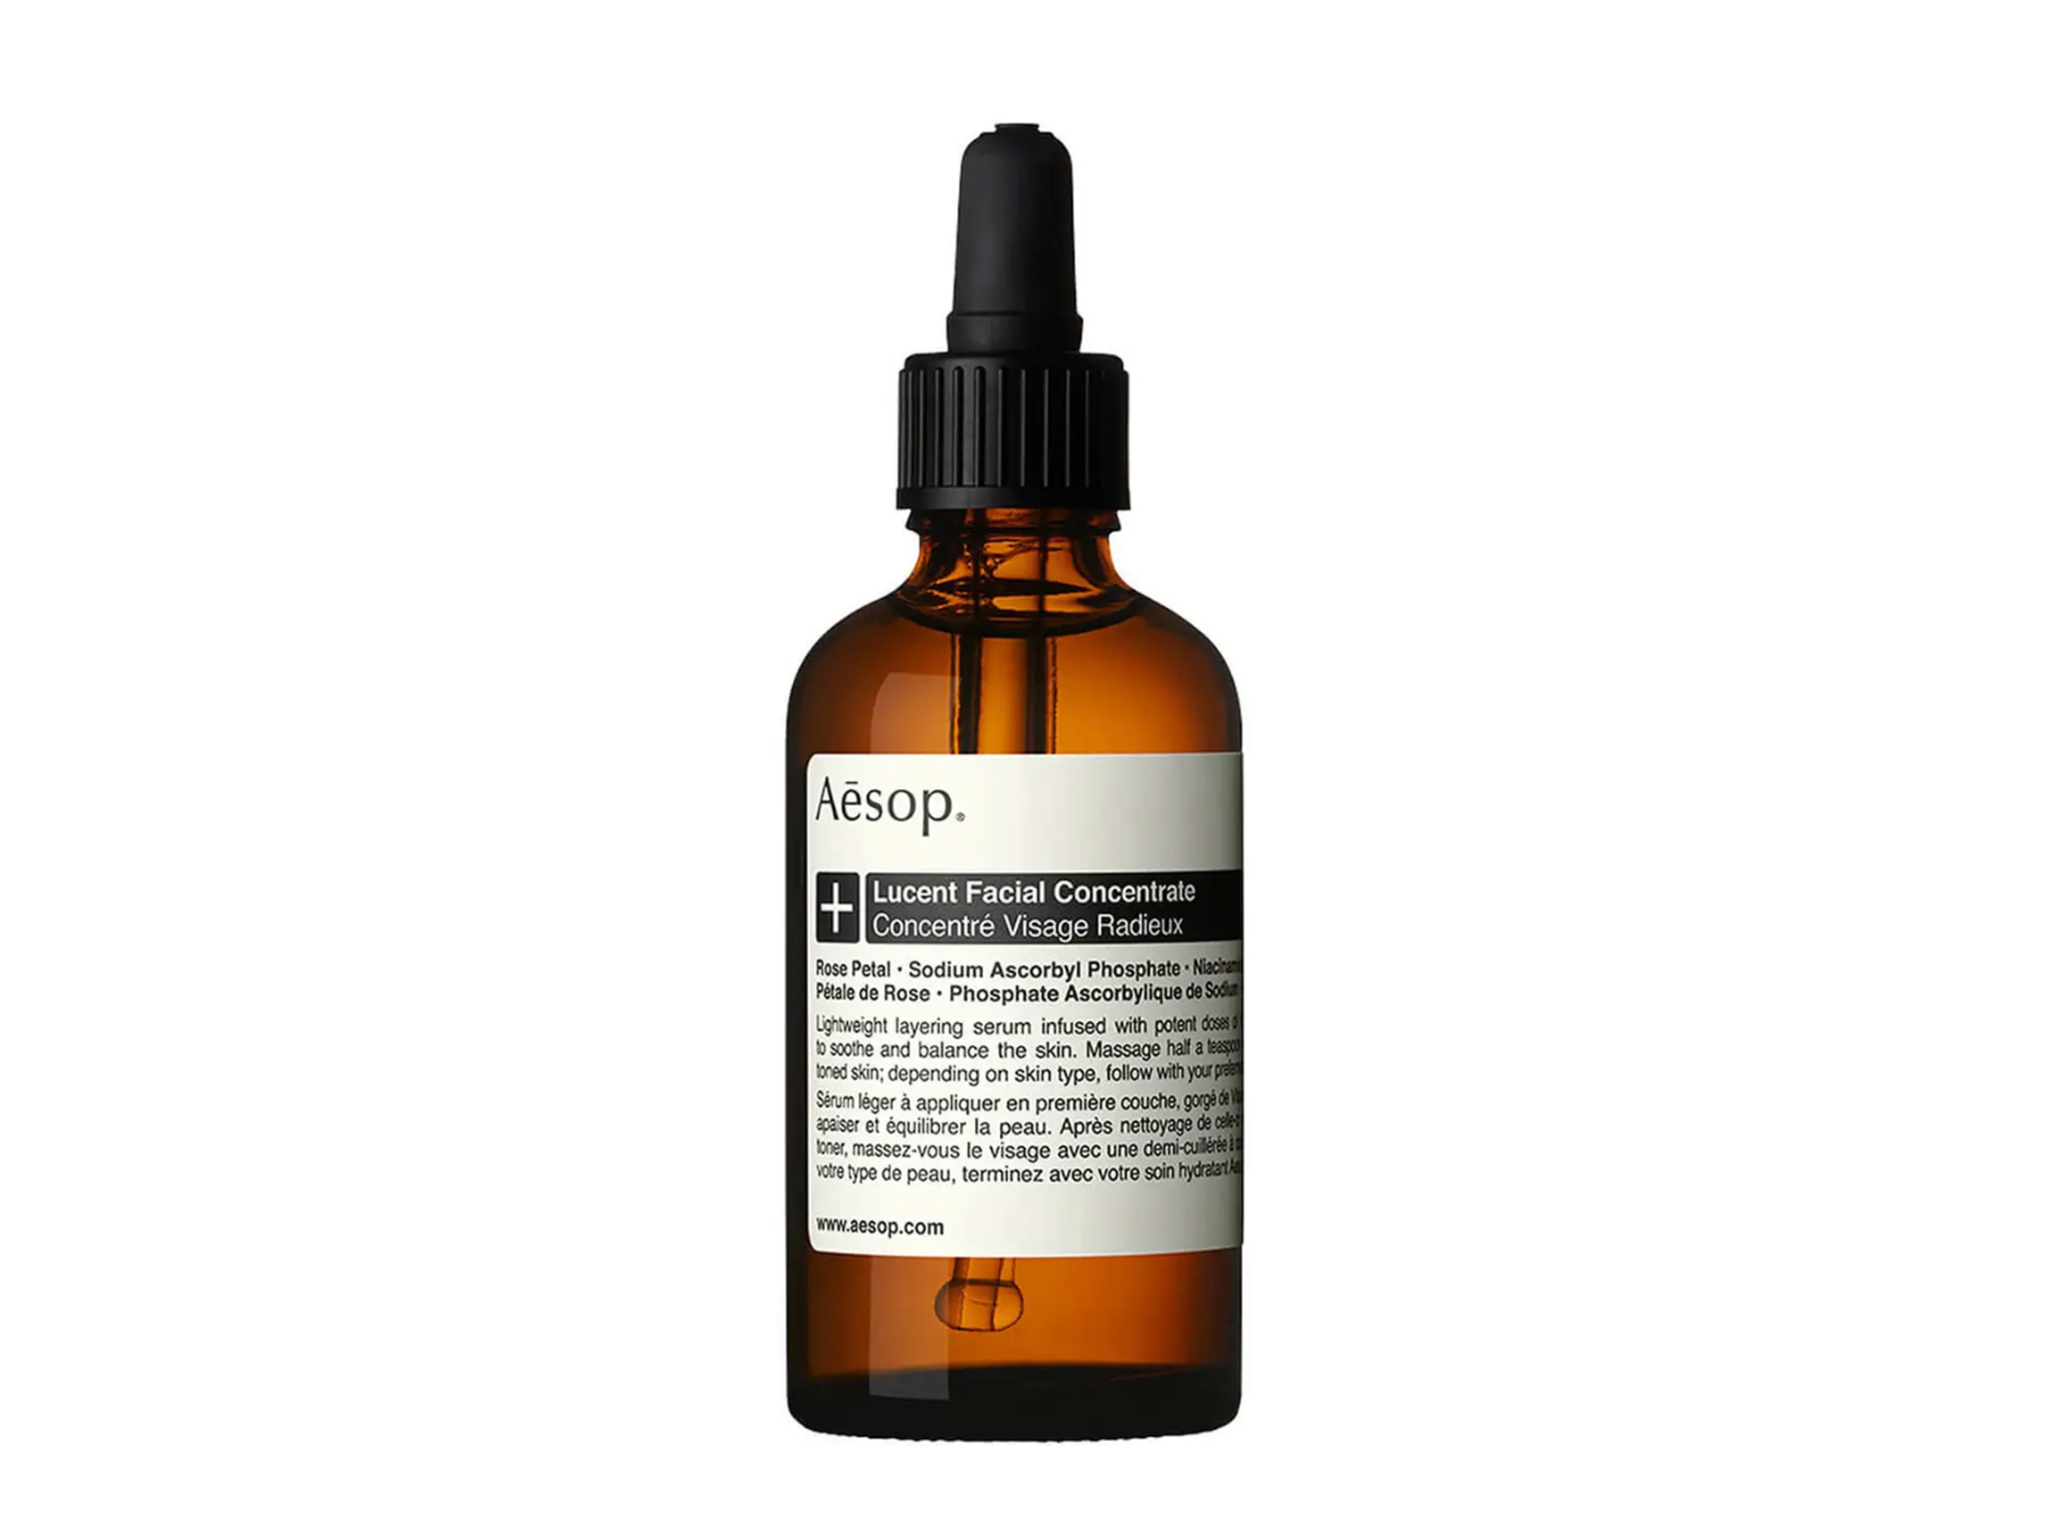 Aesop lucent facial concentrate